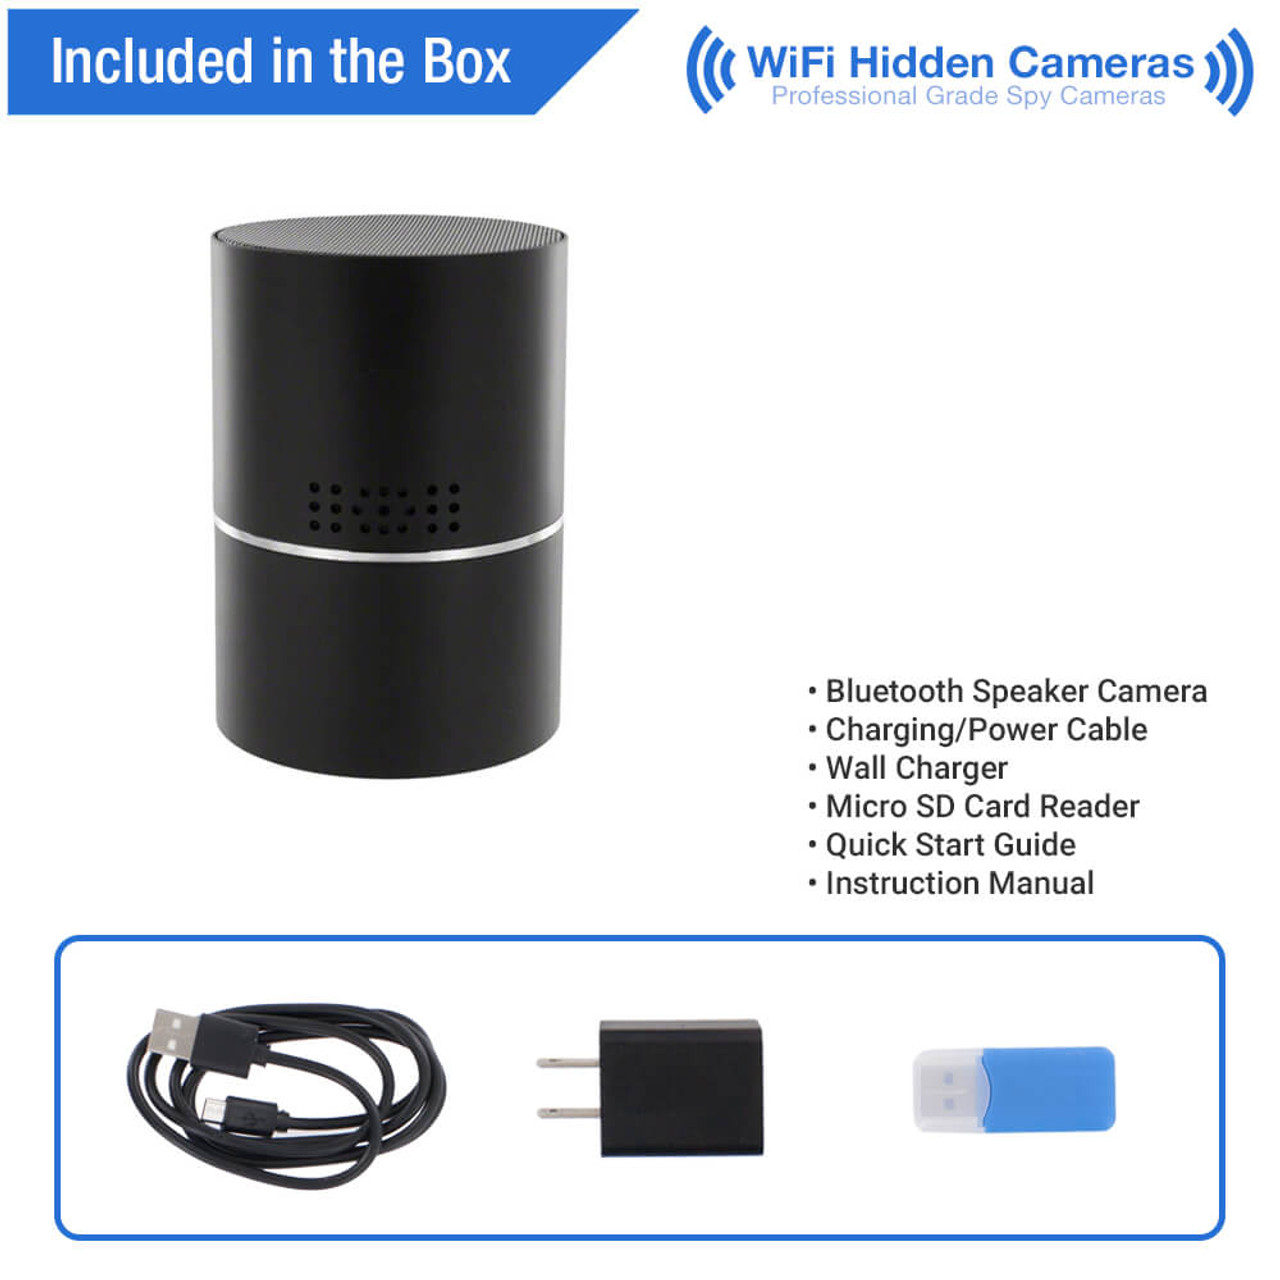 Buy HD 1080P WiFi Hidden Camera Bluetooth Speaker Spy Camera, Nanny Cam  Security for Home and Office with Motion Detection, Night Vision, Via Free  APP Android/iPhone/PC, Online at Low Prices in India 